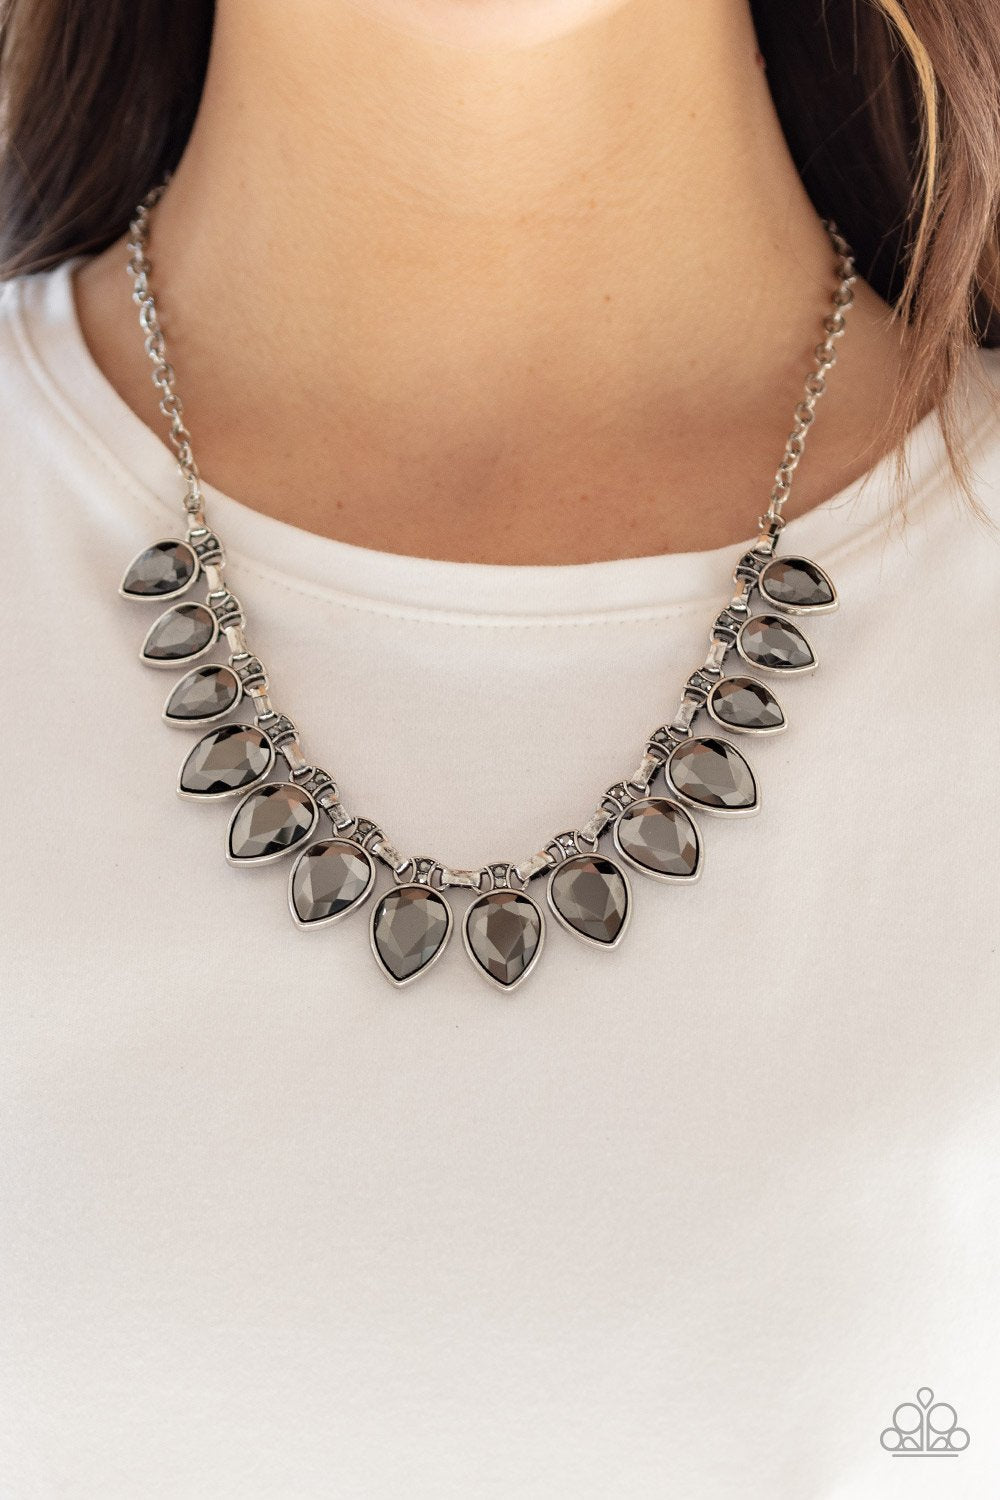 FEARLESS is More - silver - Paparazzi necklace